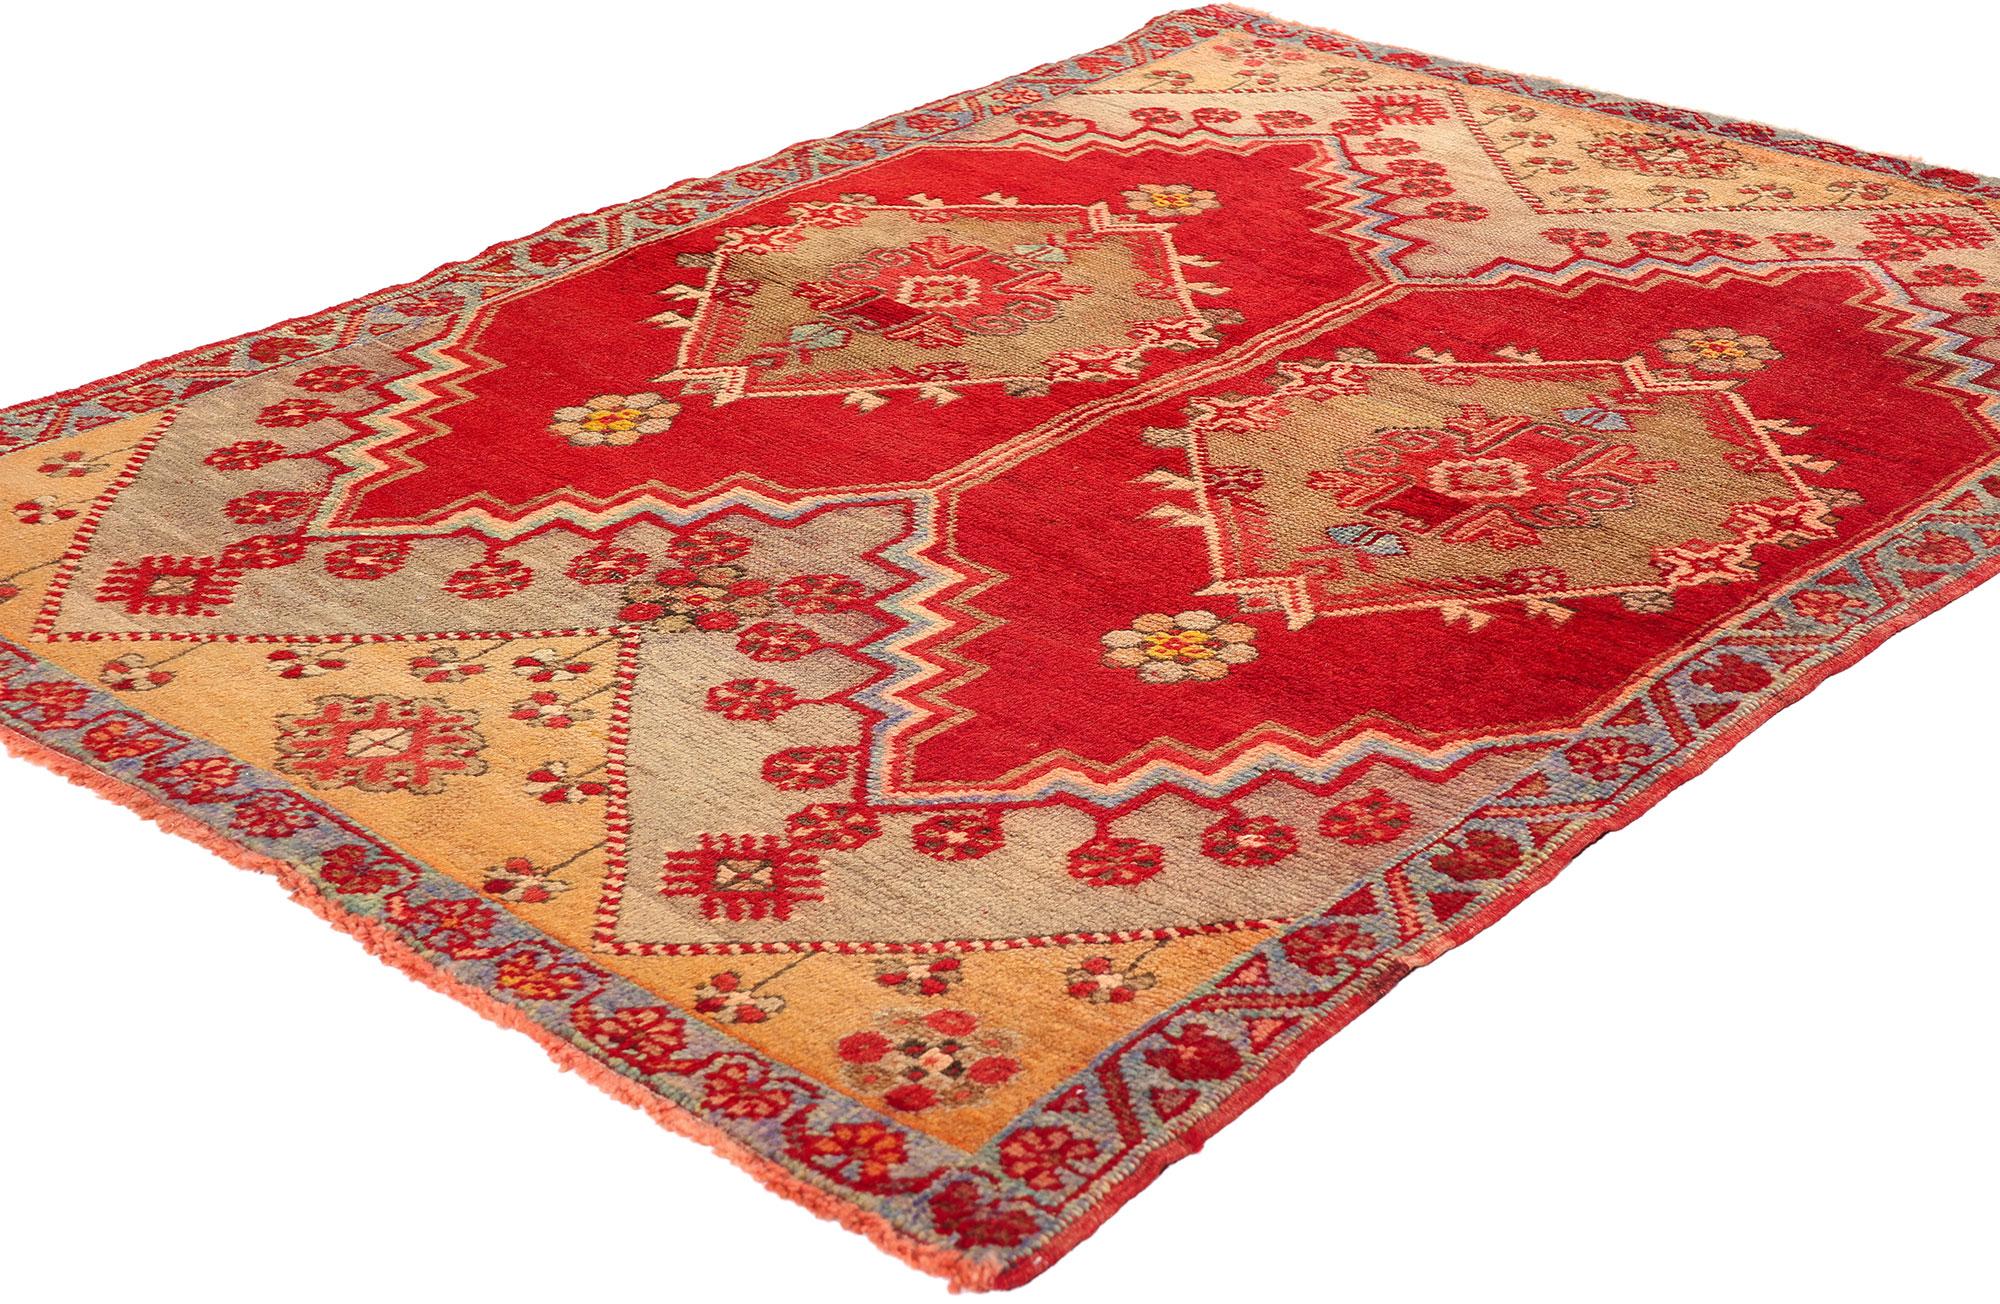 51122 Vintage Red Turkish Oushak Rug, 03'08 X 05'00. Please note this listing is for one piece; it does have a matching piece and we have added a picture so you can see them together.
Exuding a captivating allure reminiscent of sumptuous red Italian